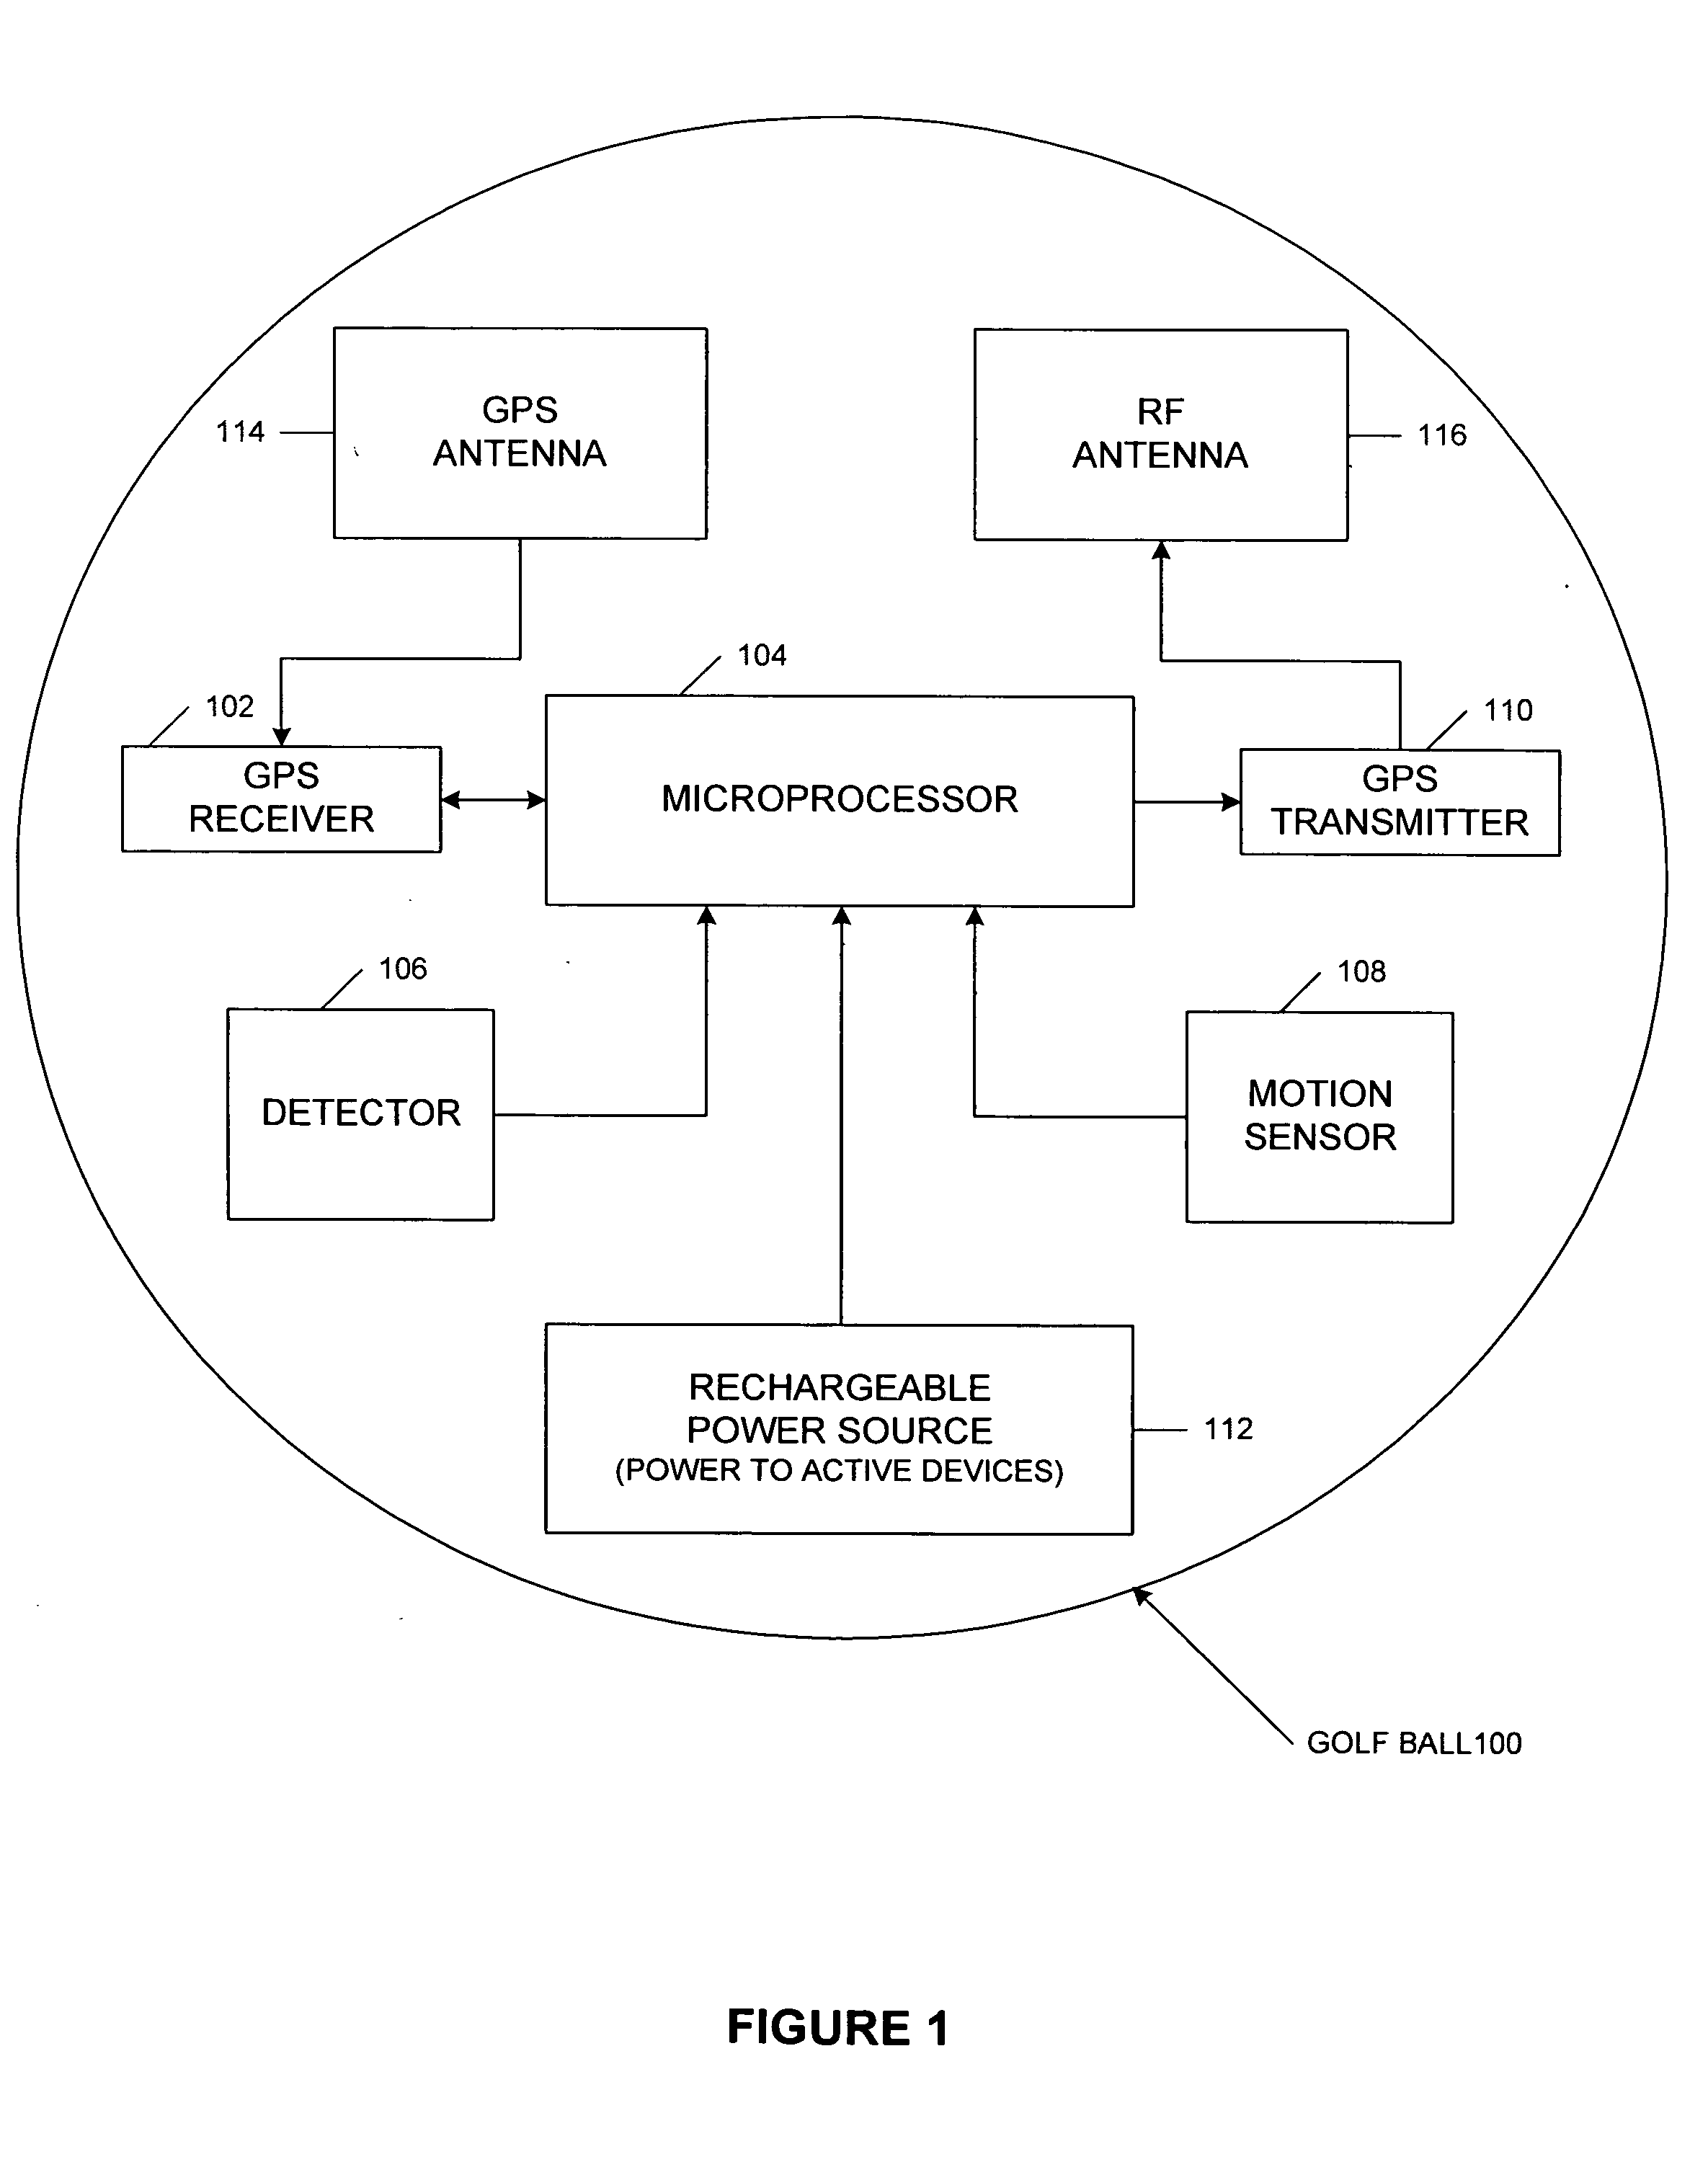 System and method for tracking identity movement and location of sports objects